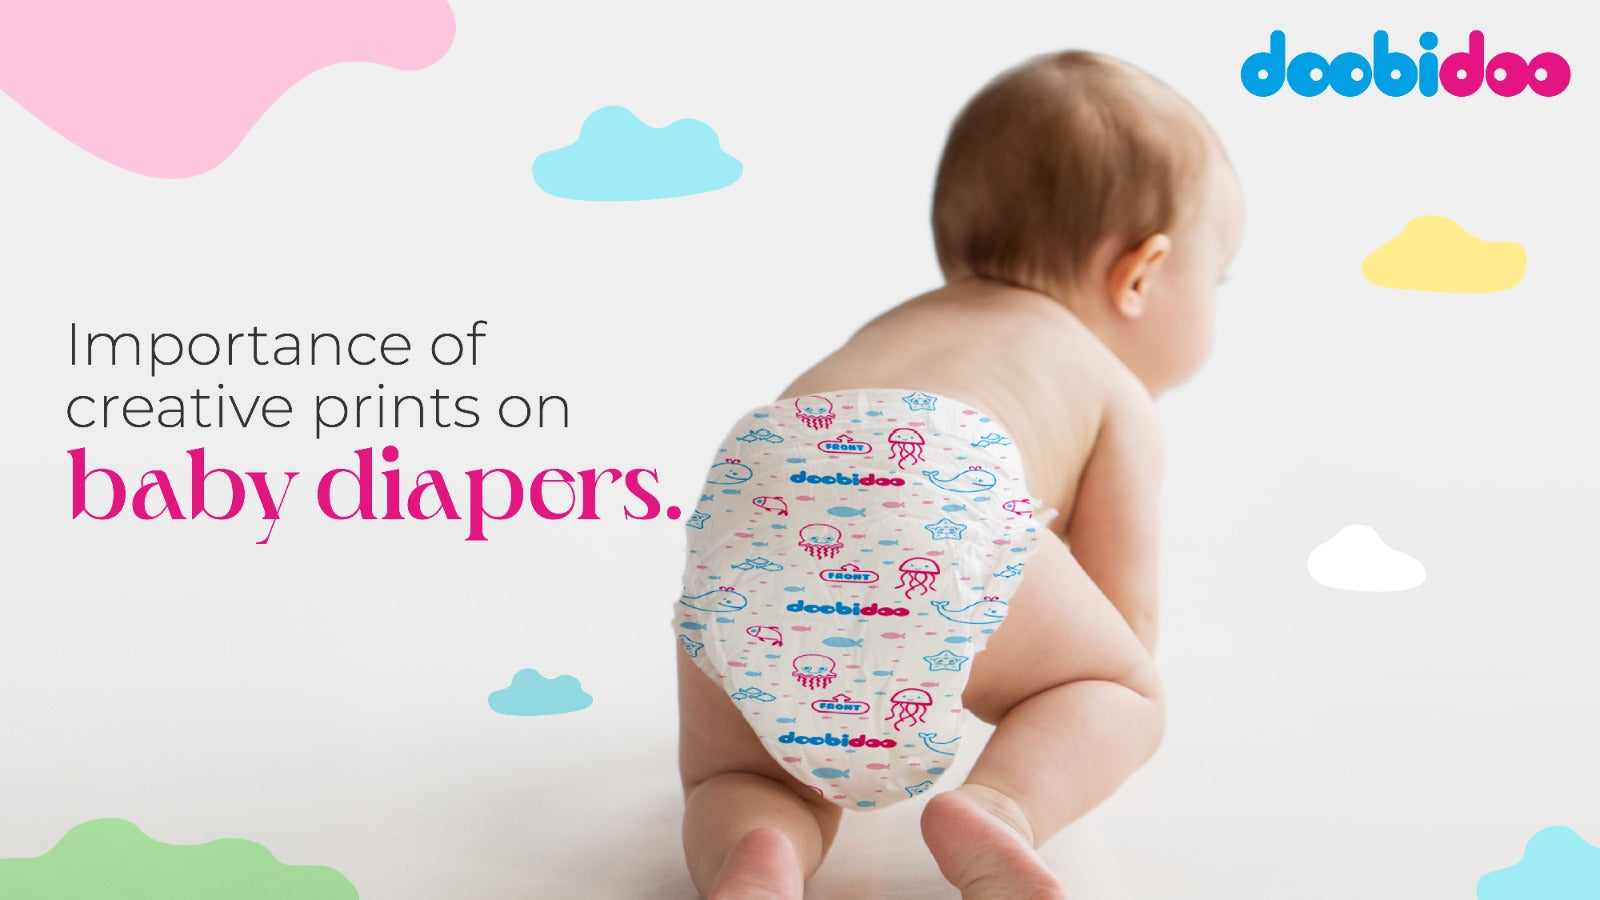 Importance of creative prints on baby diapers